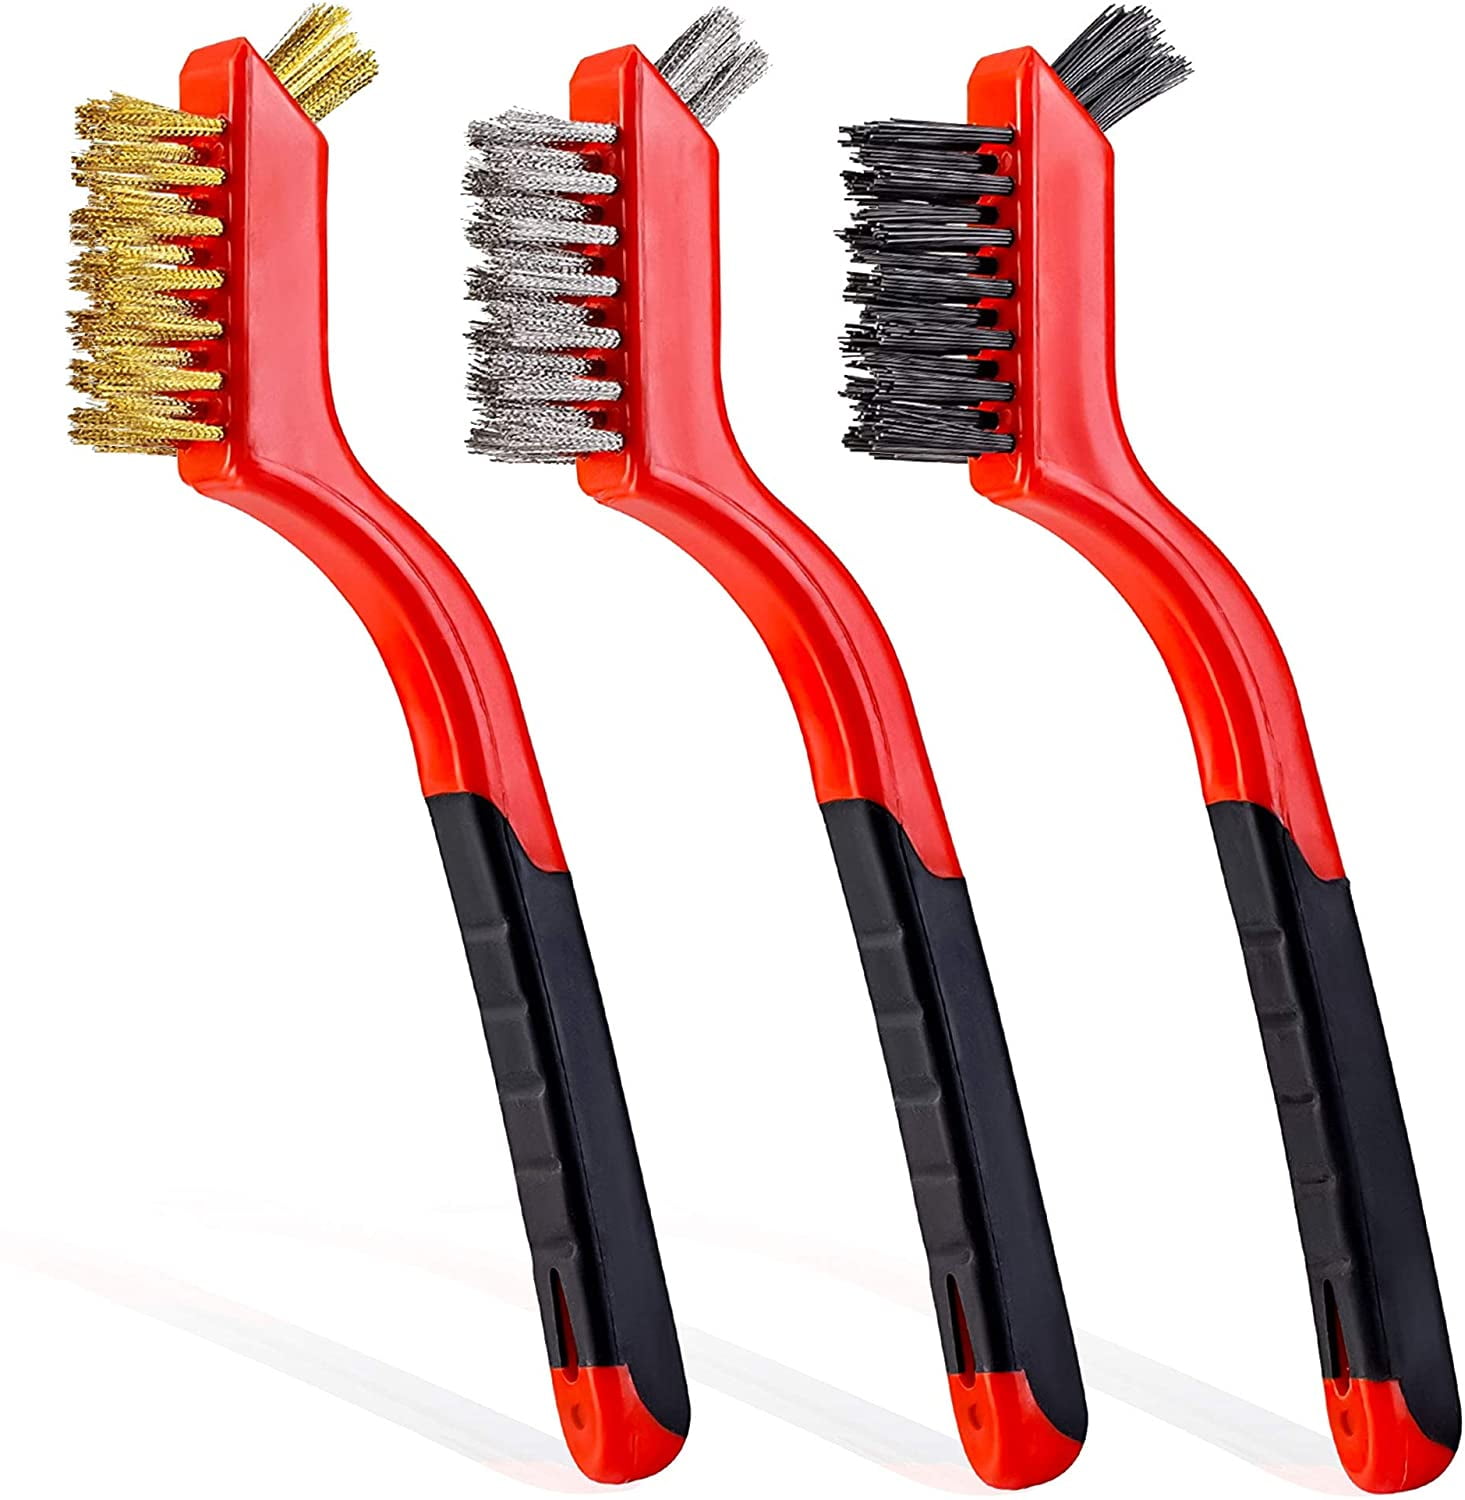 Remove Rush from Iron Pack of 3 Driver's Choice wire brush set of 3 pcs 2 